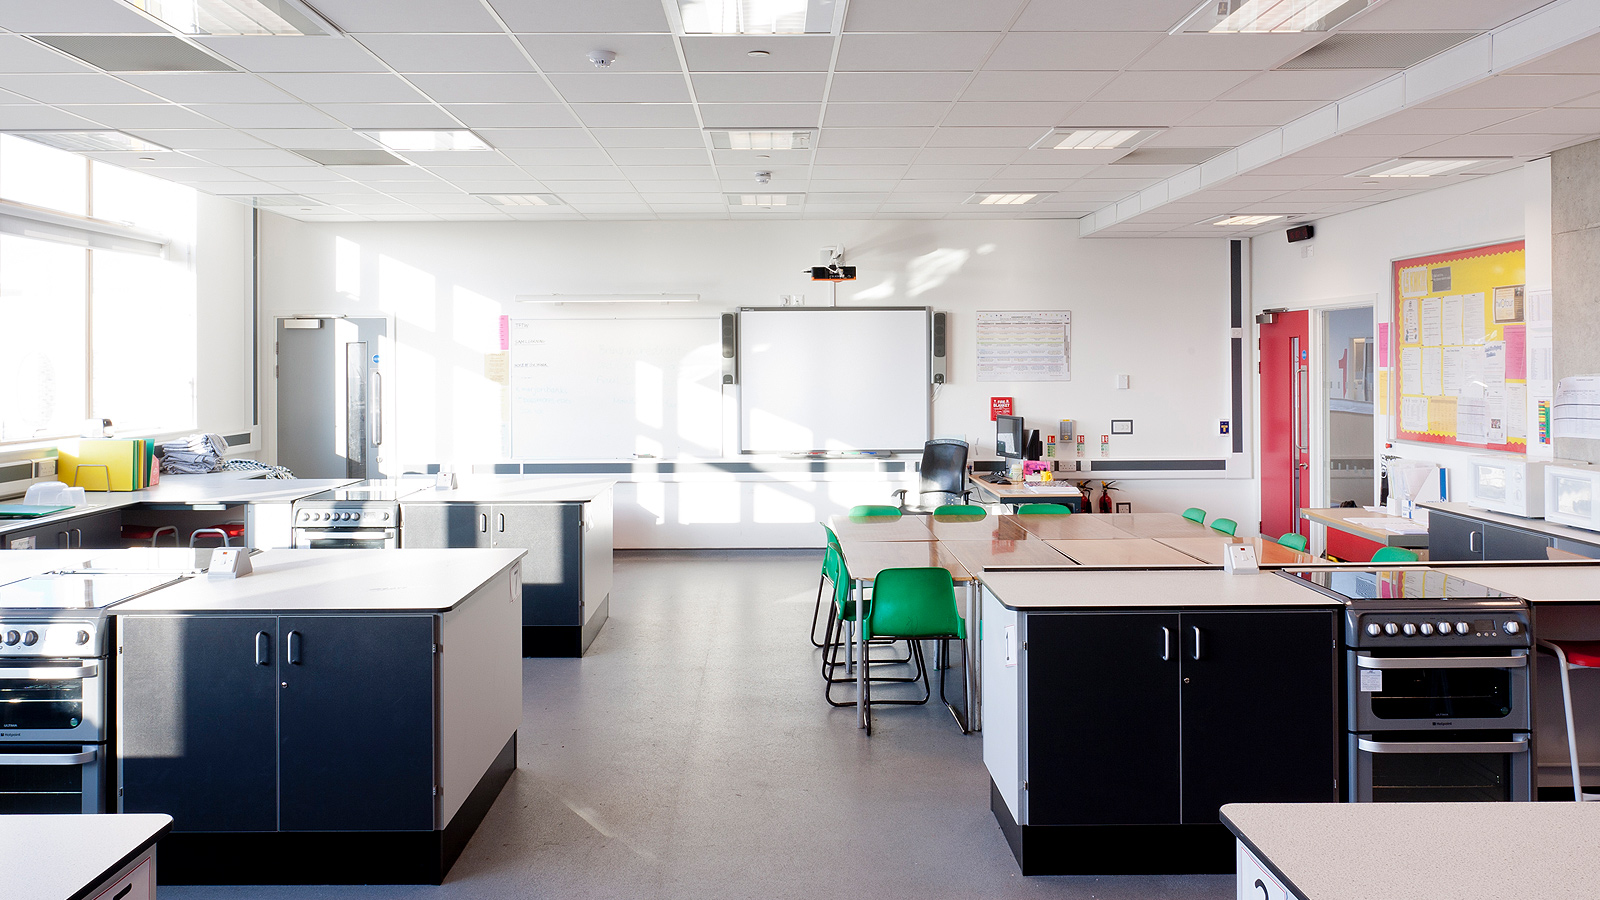 Light, Sight and Sound – The Keys to Ideal Learning Environments